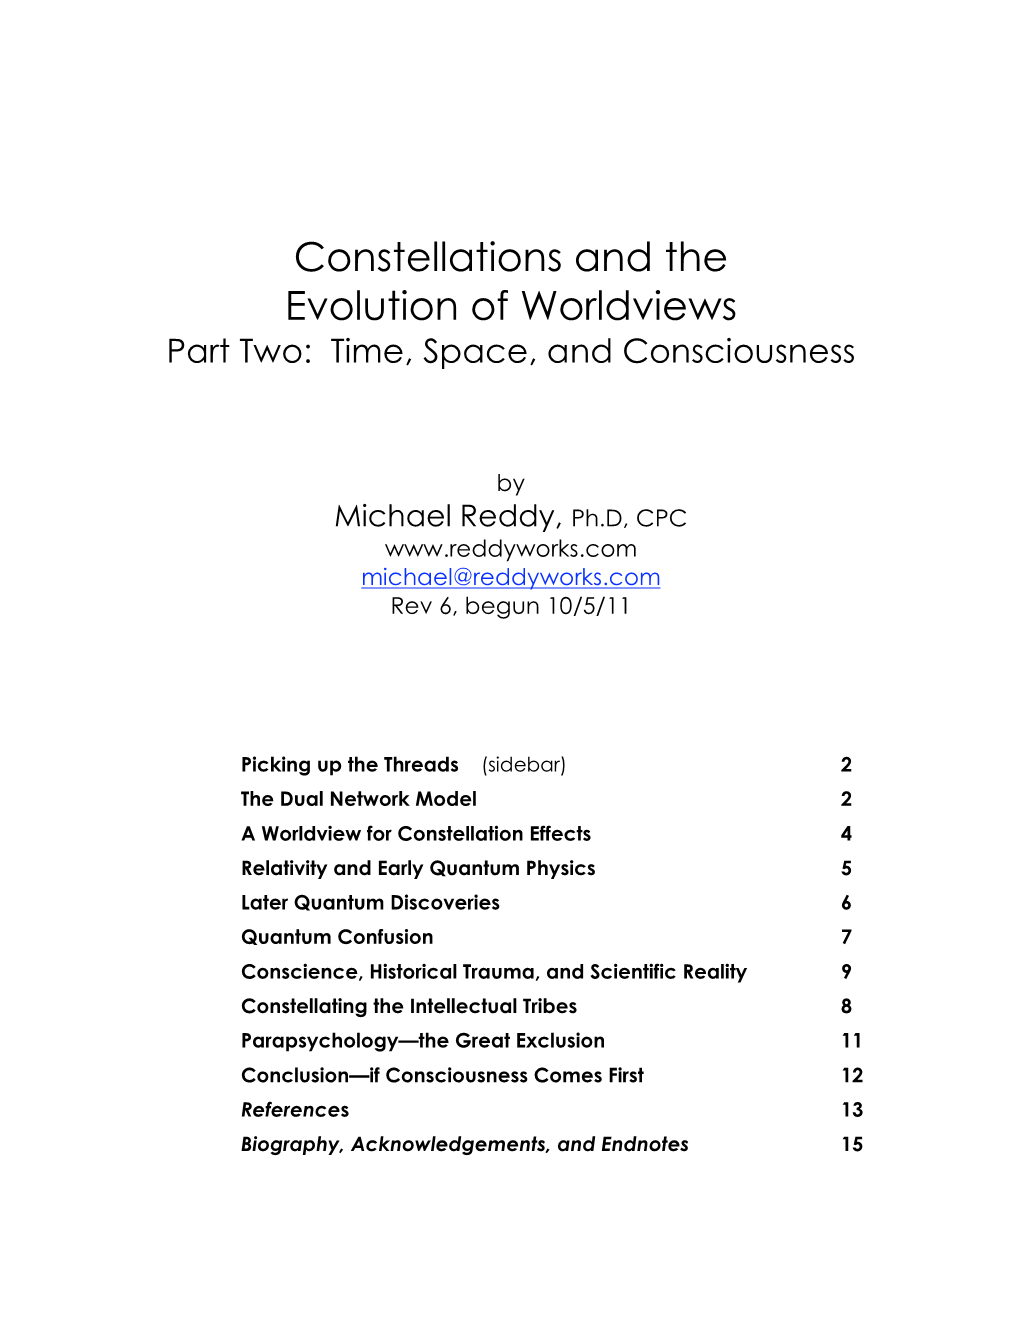 Constellations and the Evolution of Worldviews Part Two: Time, Space, and Consciousness